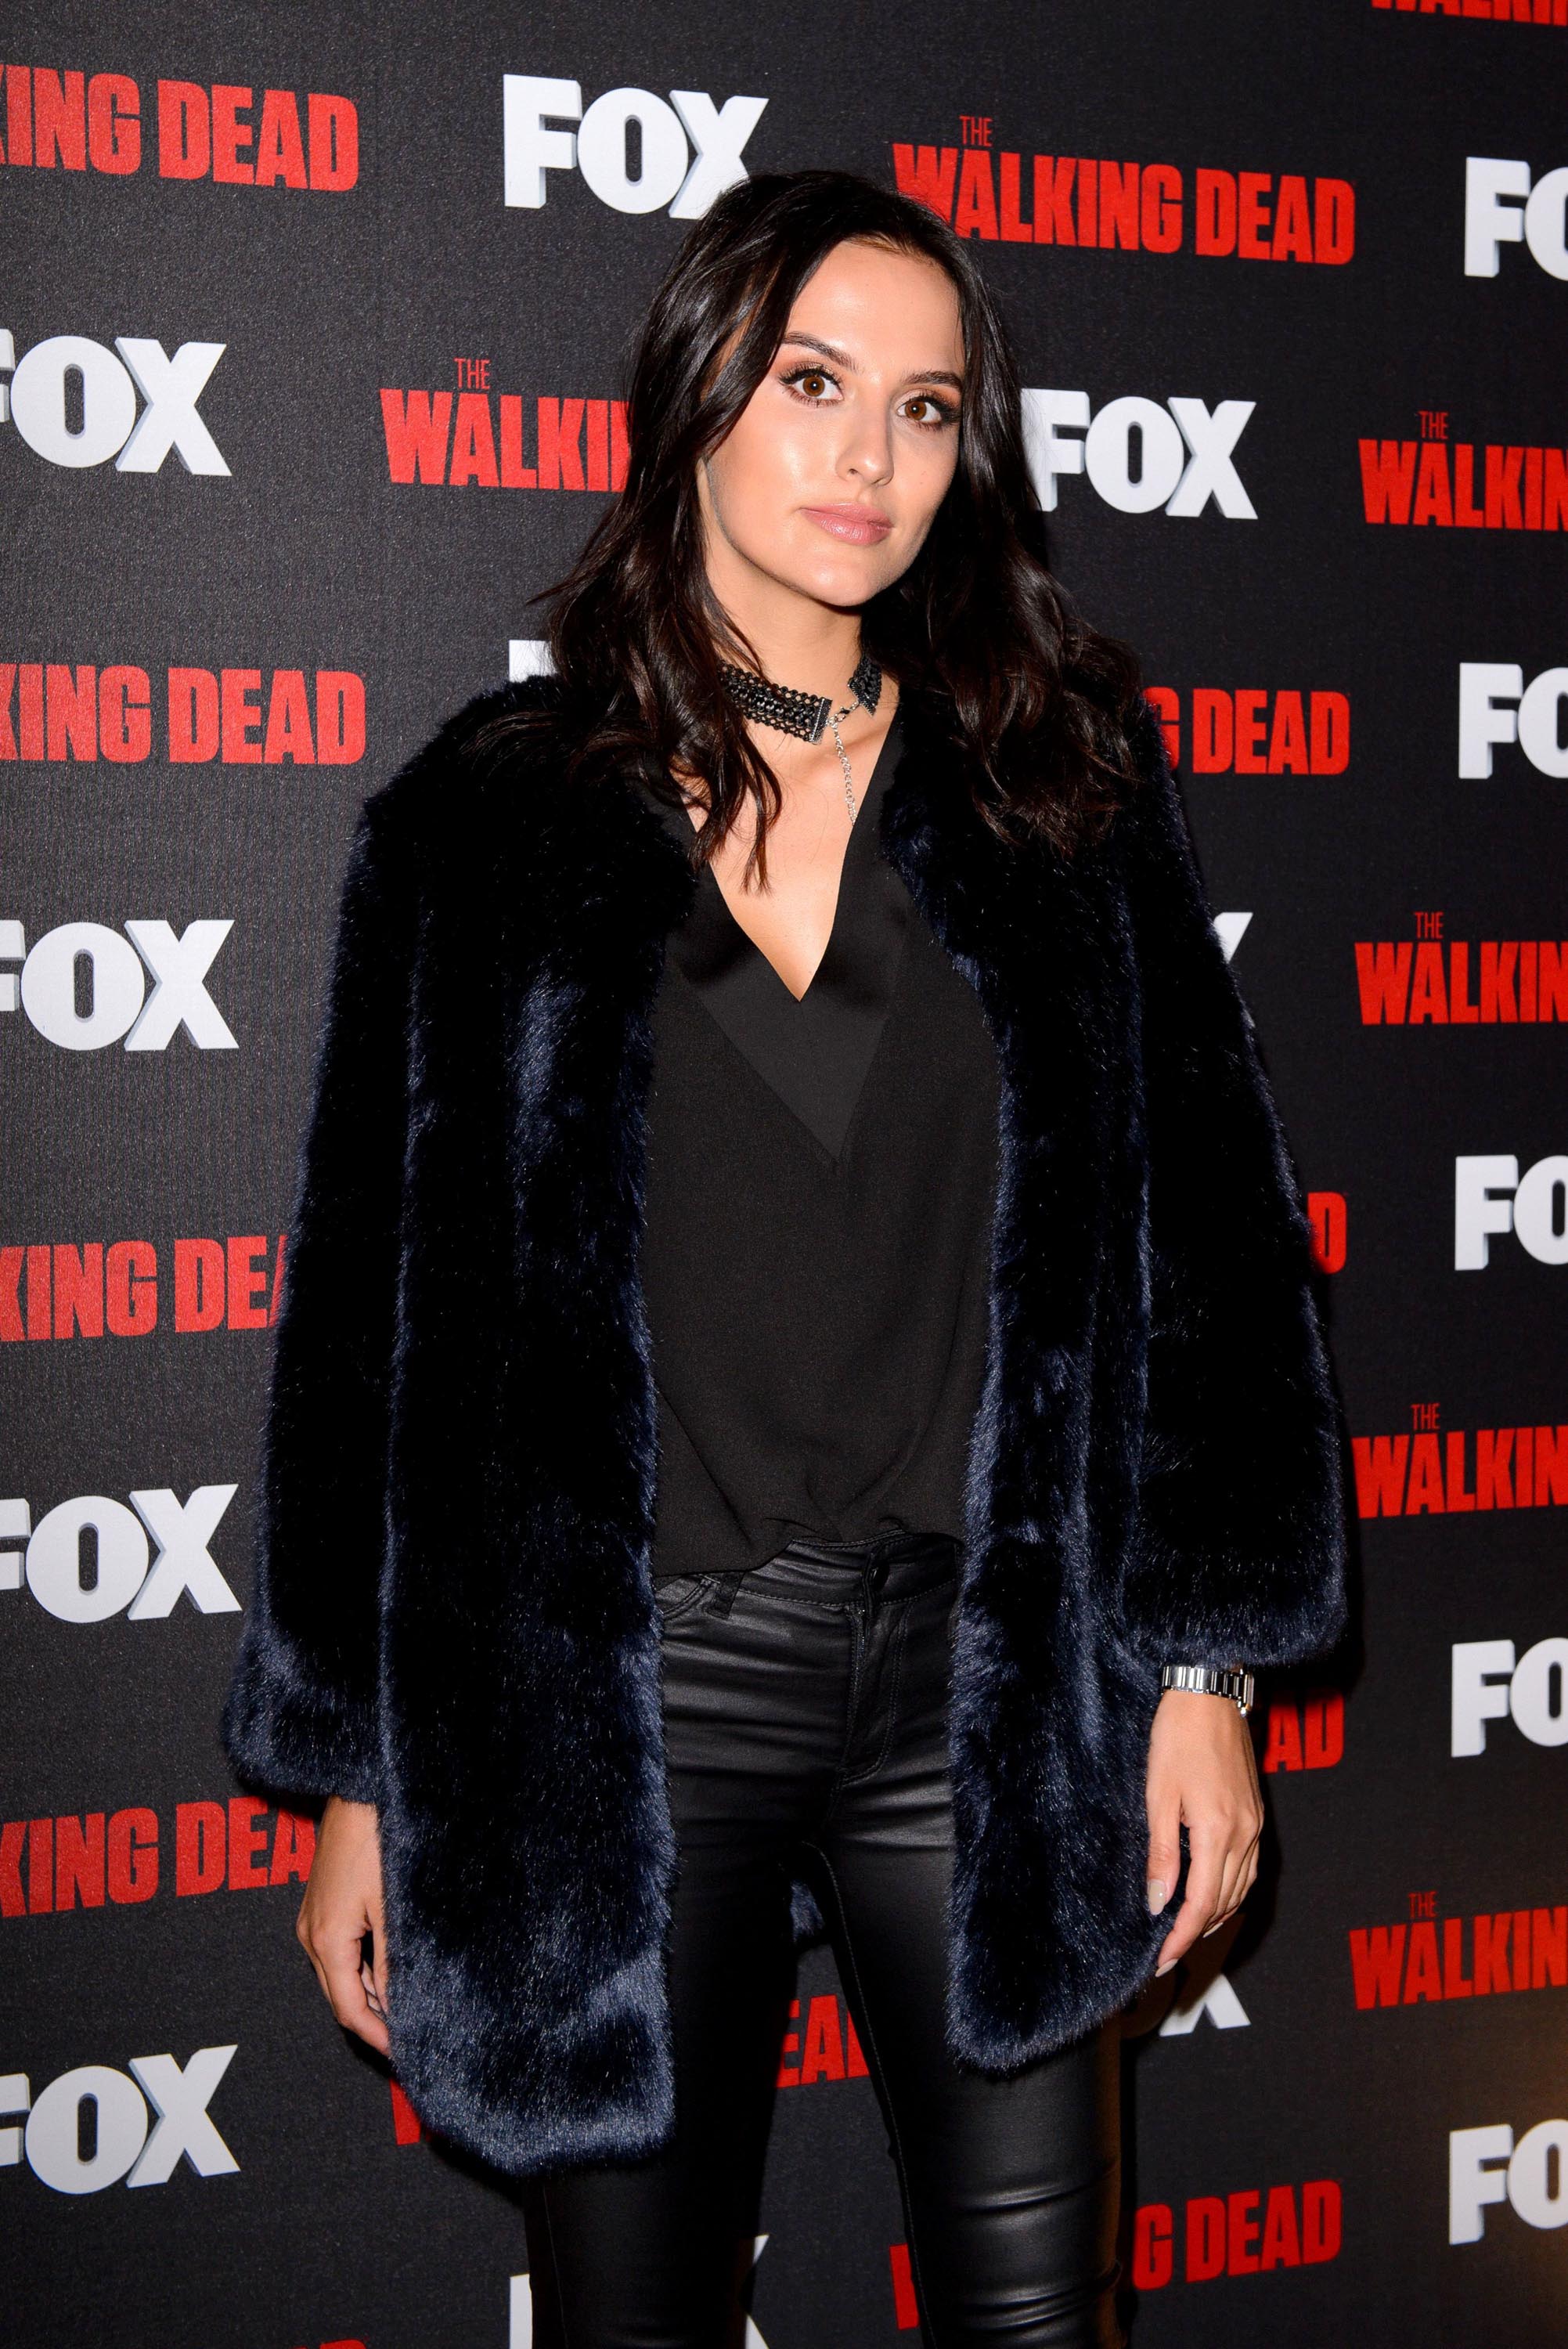 Lucy Watson attends Fox presents A night with The Walking Dead